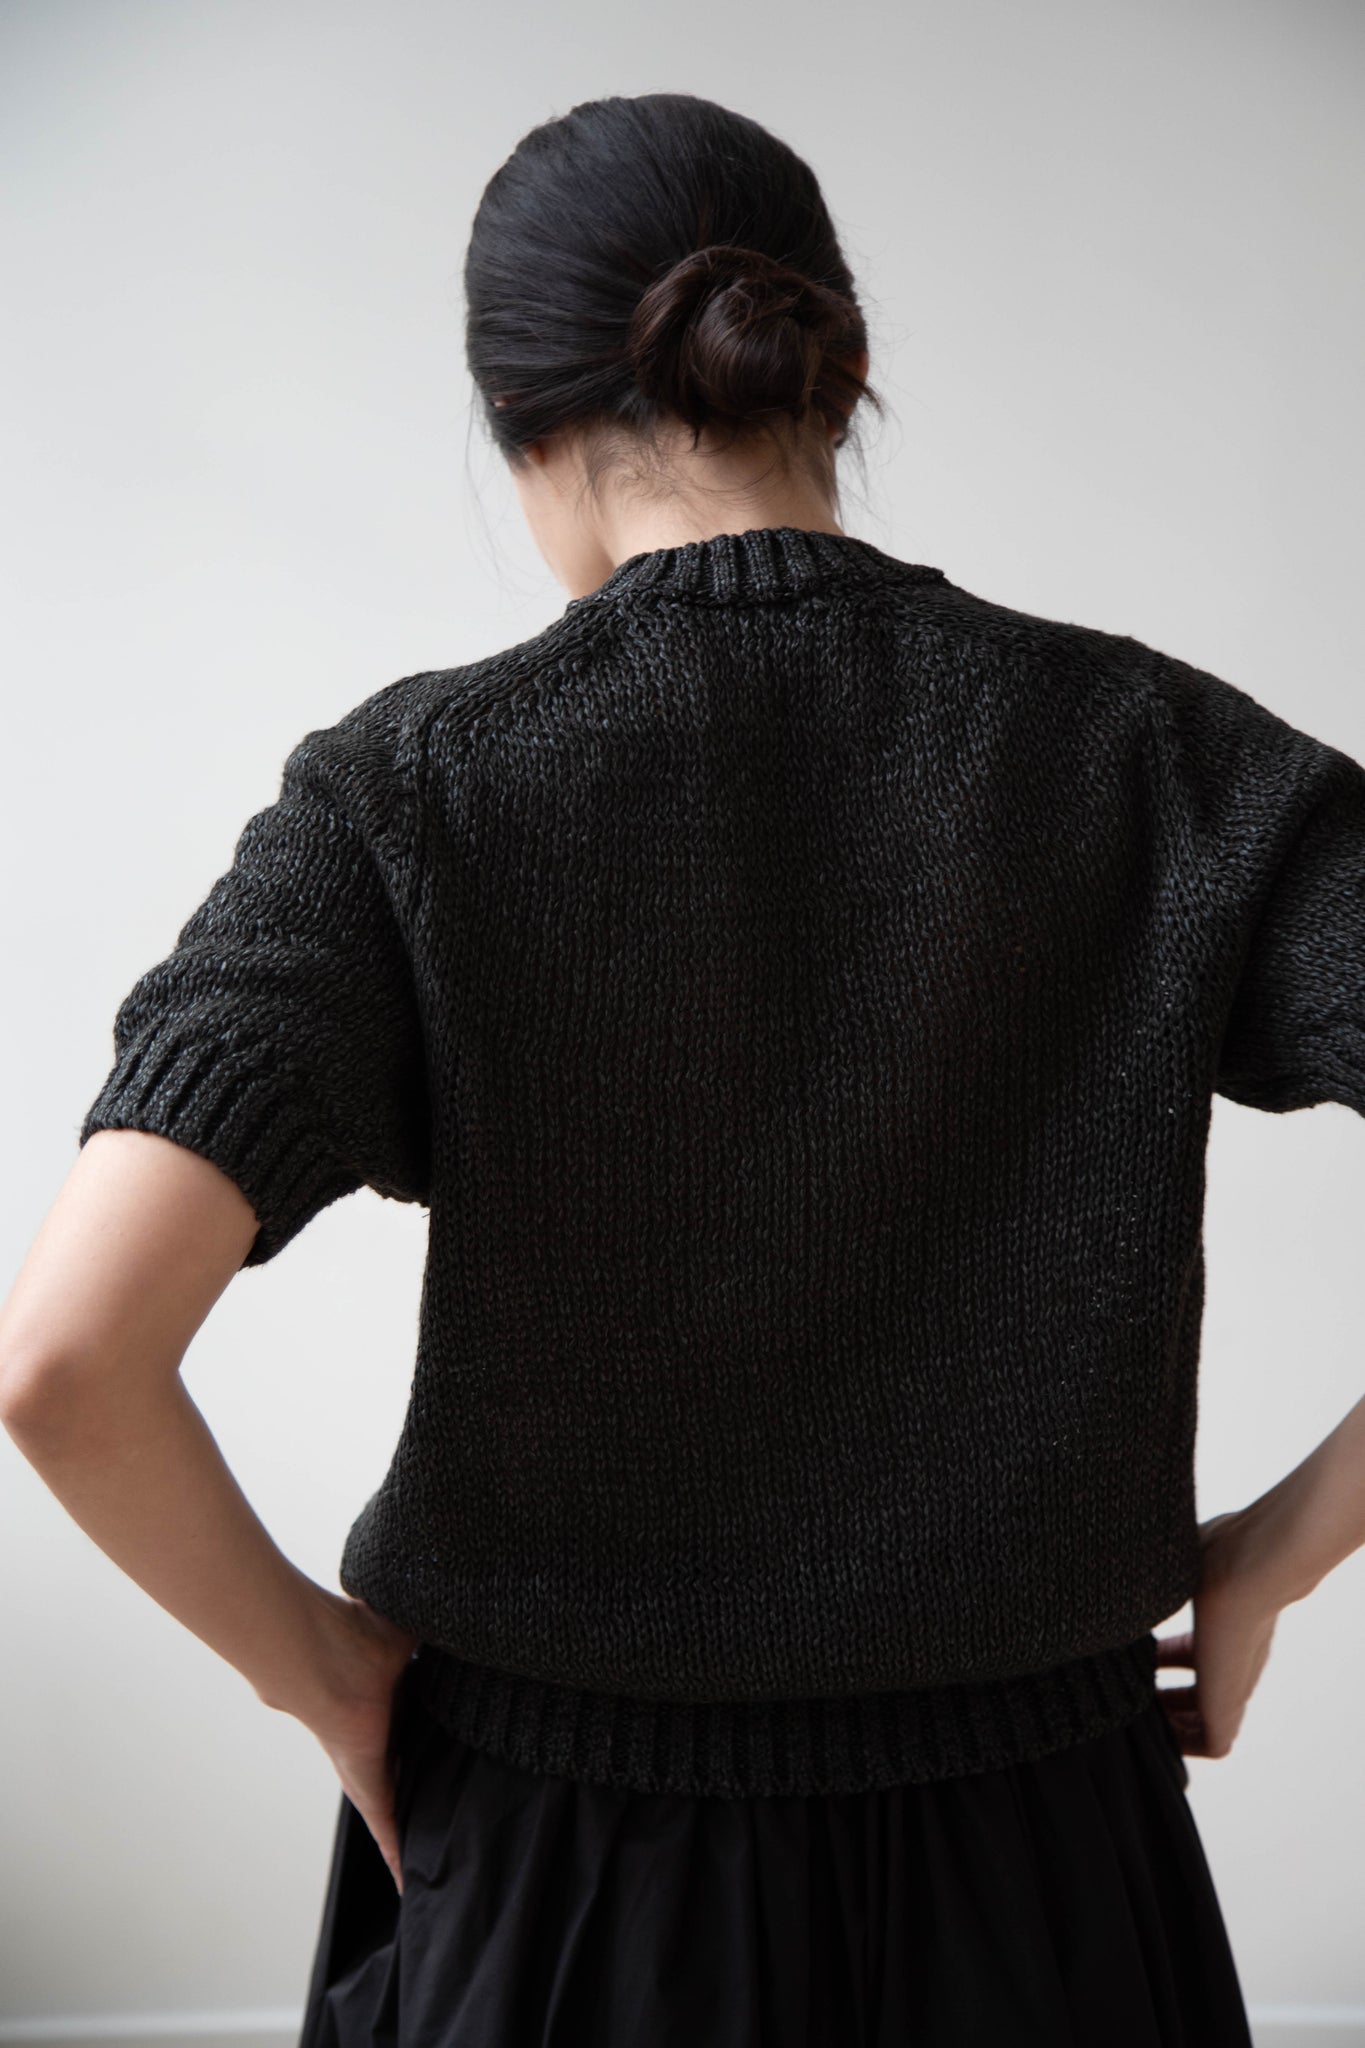 Nothing Written Bamboo Short Pullover in Charcoal